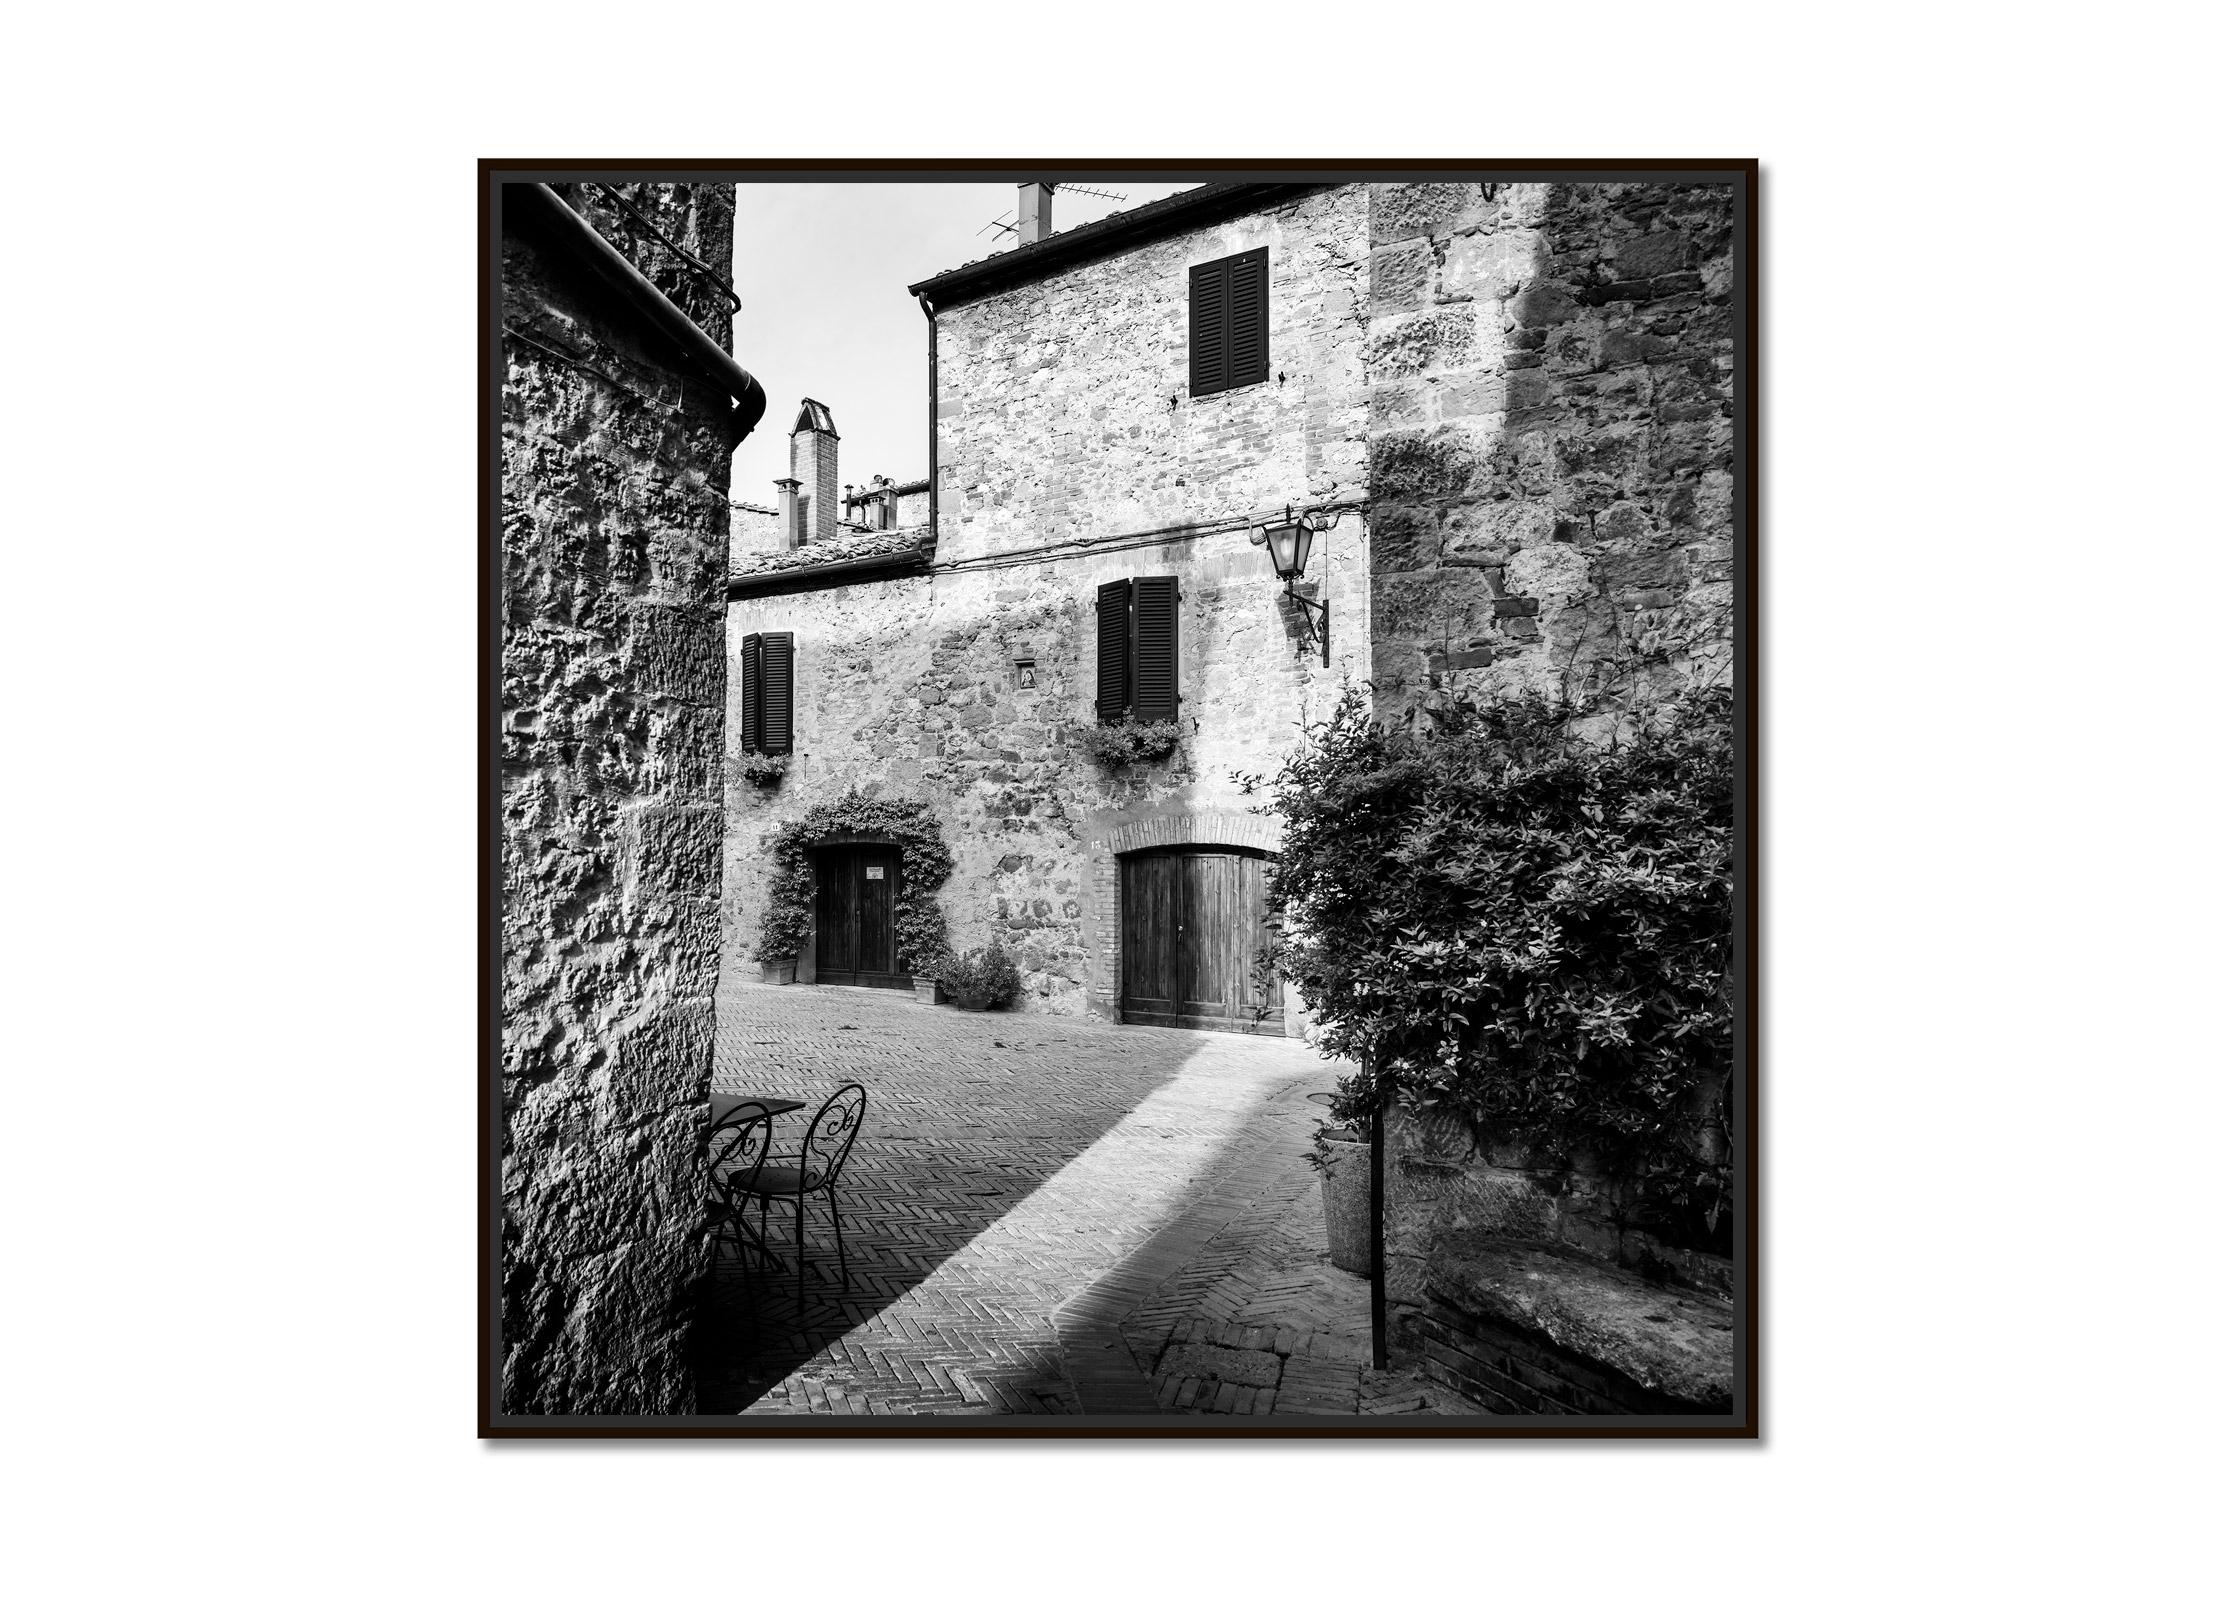 Tuscan Courtyard, old Town, Tuscany, Italy, black and white photography print - Photograph by Gerald Berghammer